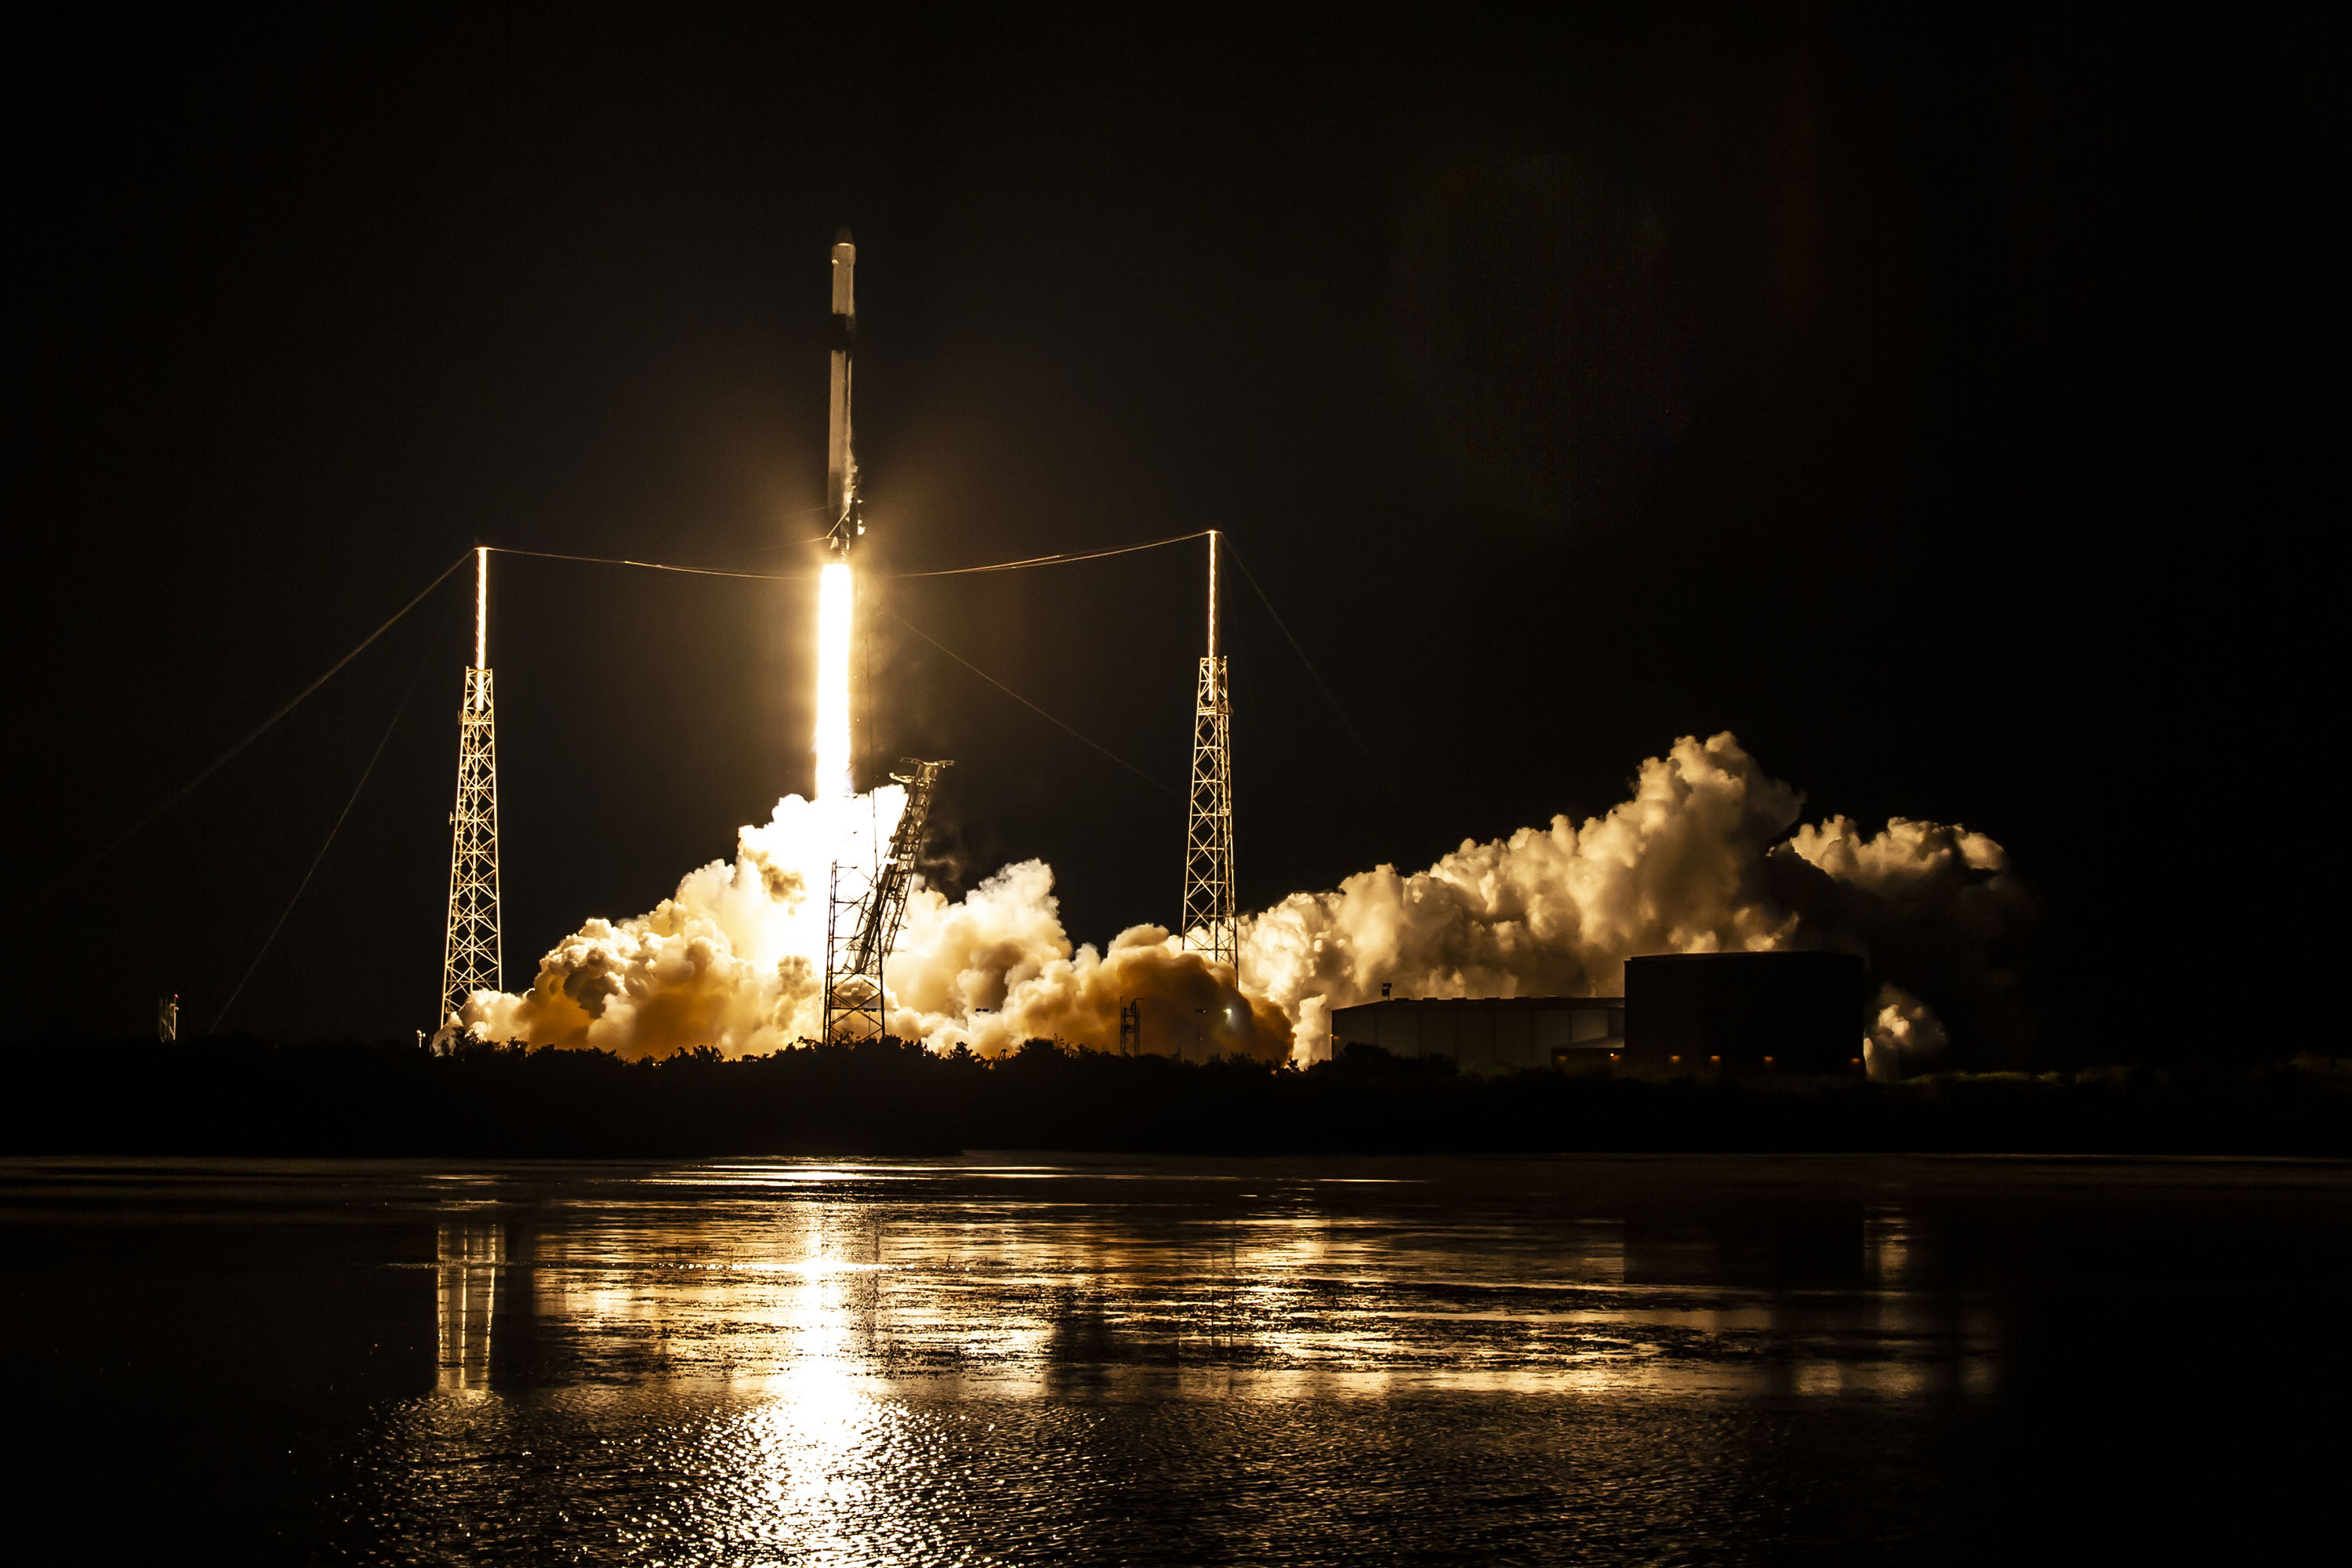 Launch of Space X CRS20 from Cape Canaveral, USA on March 6th. Image: SpaceX